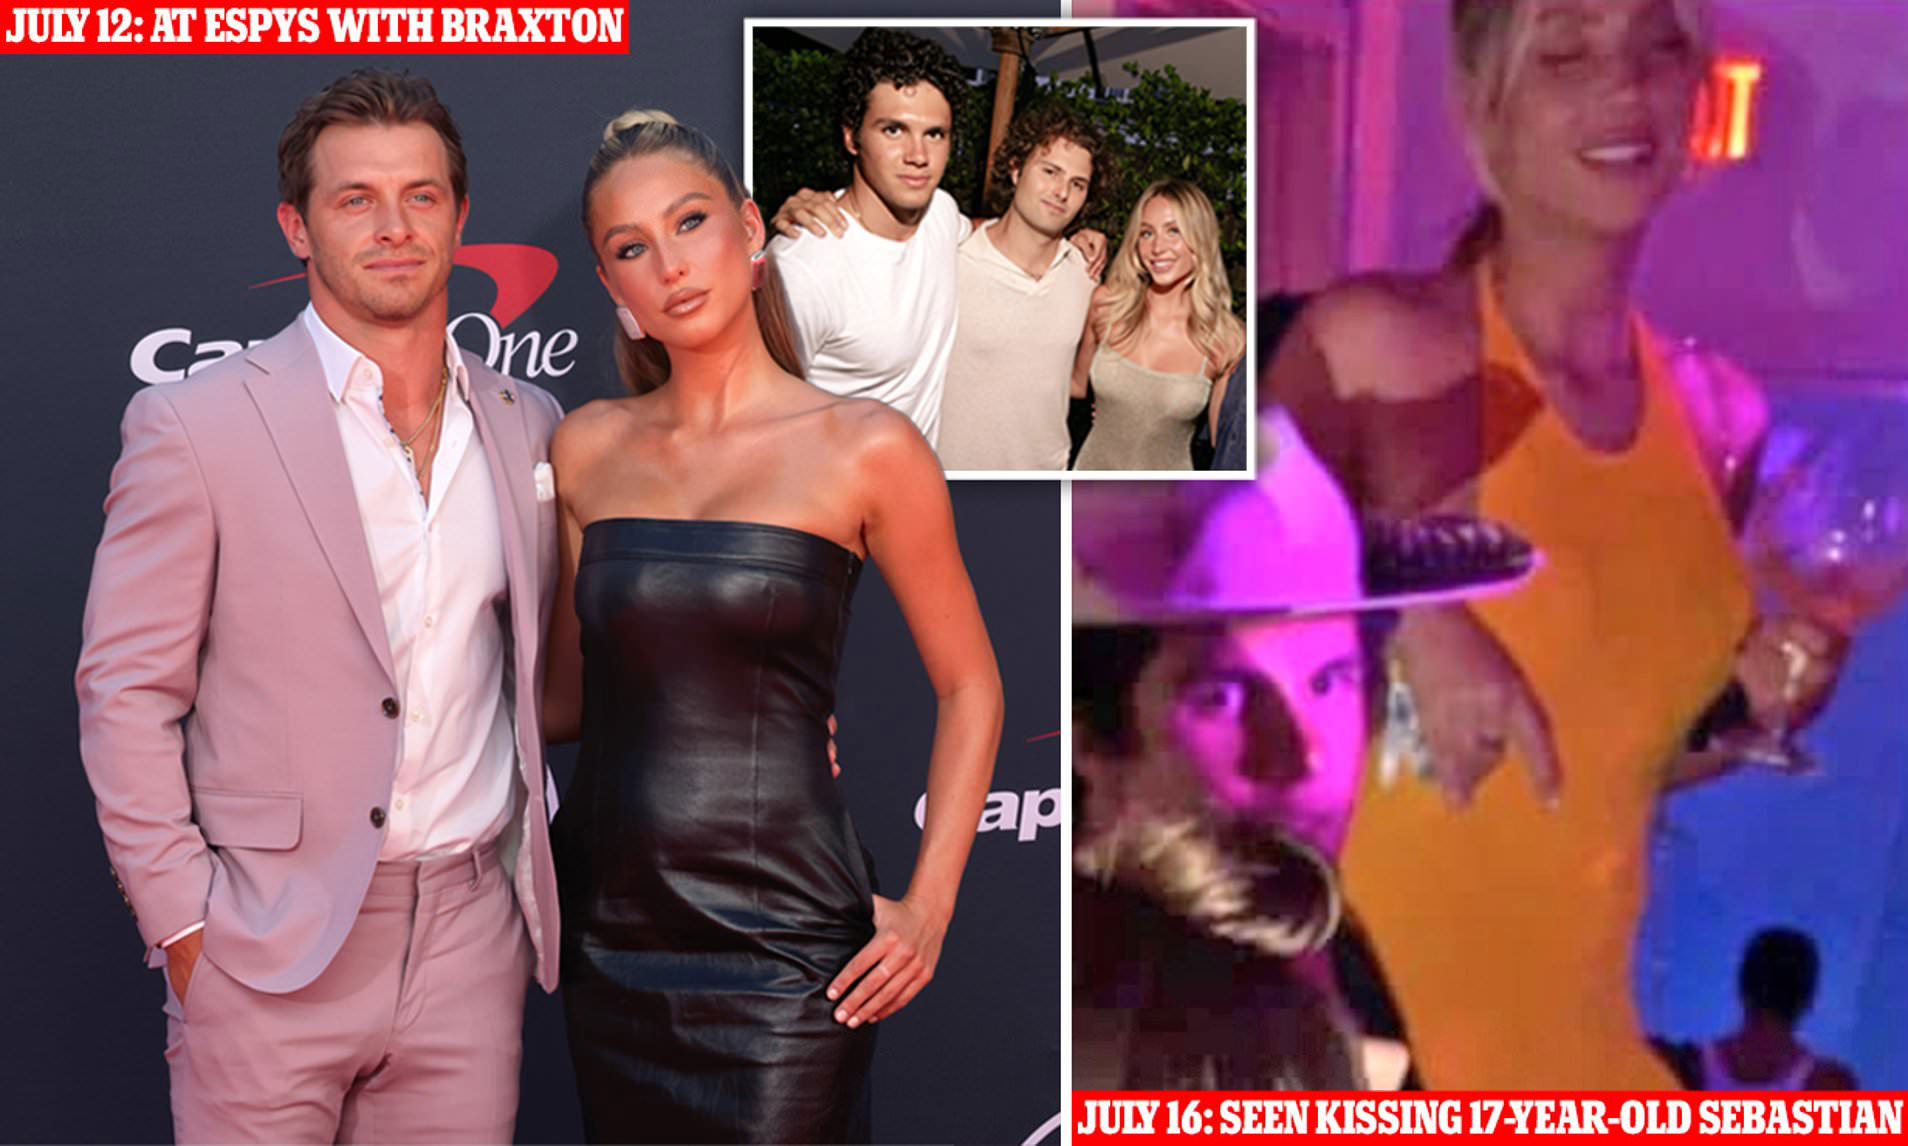 Alix Earle, 22, dragged for hook-up with Donna Karan's grandson, 17